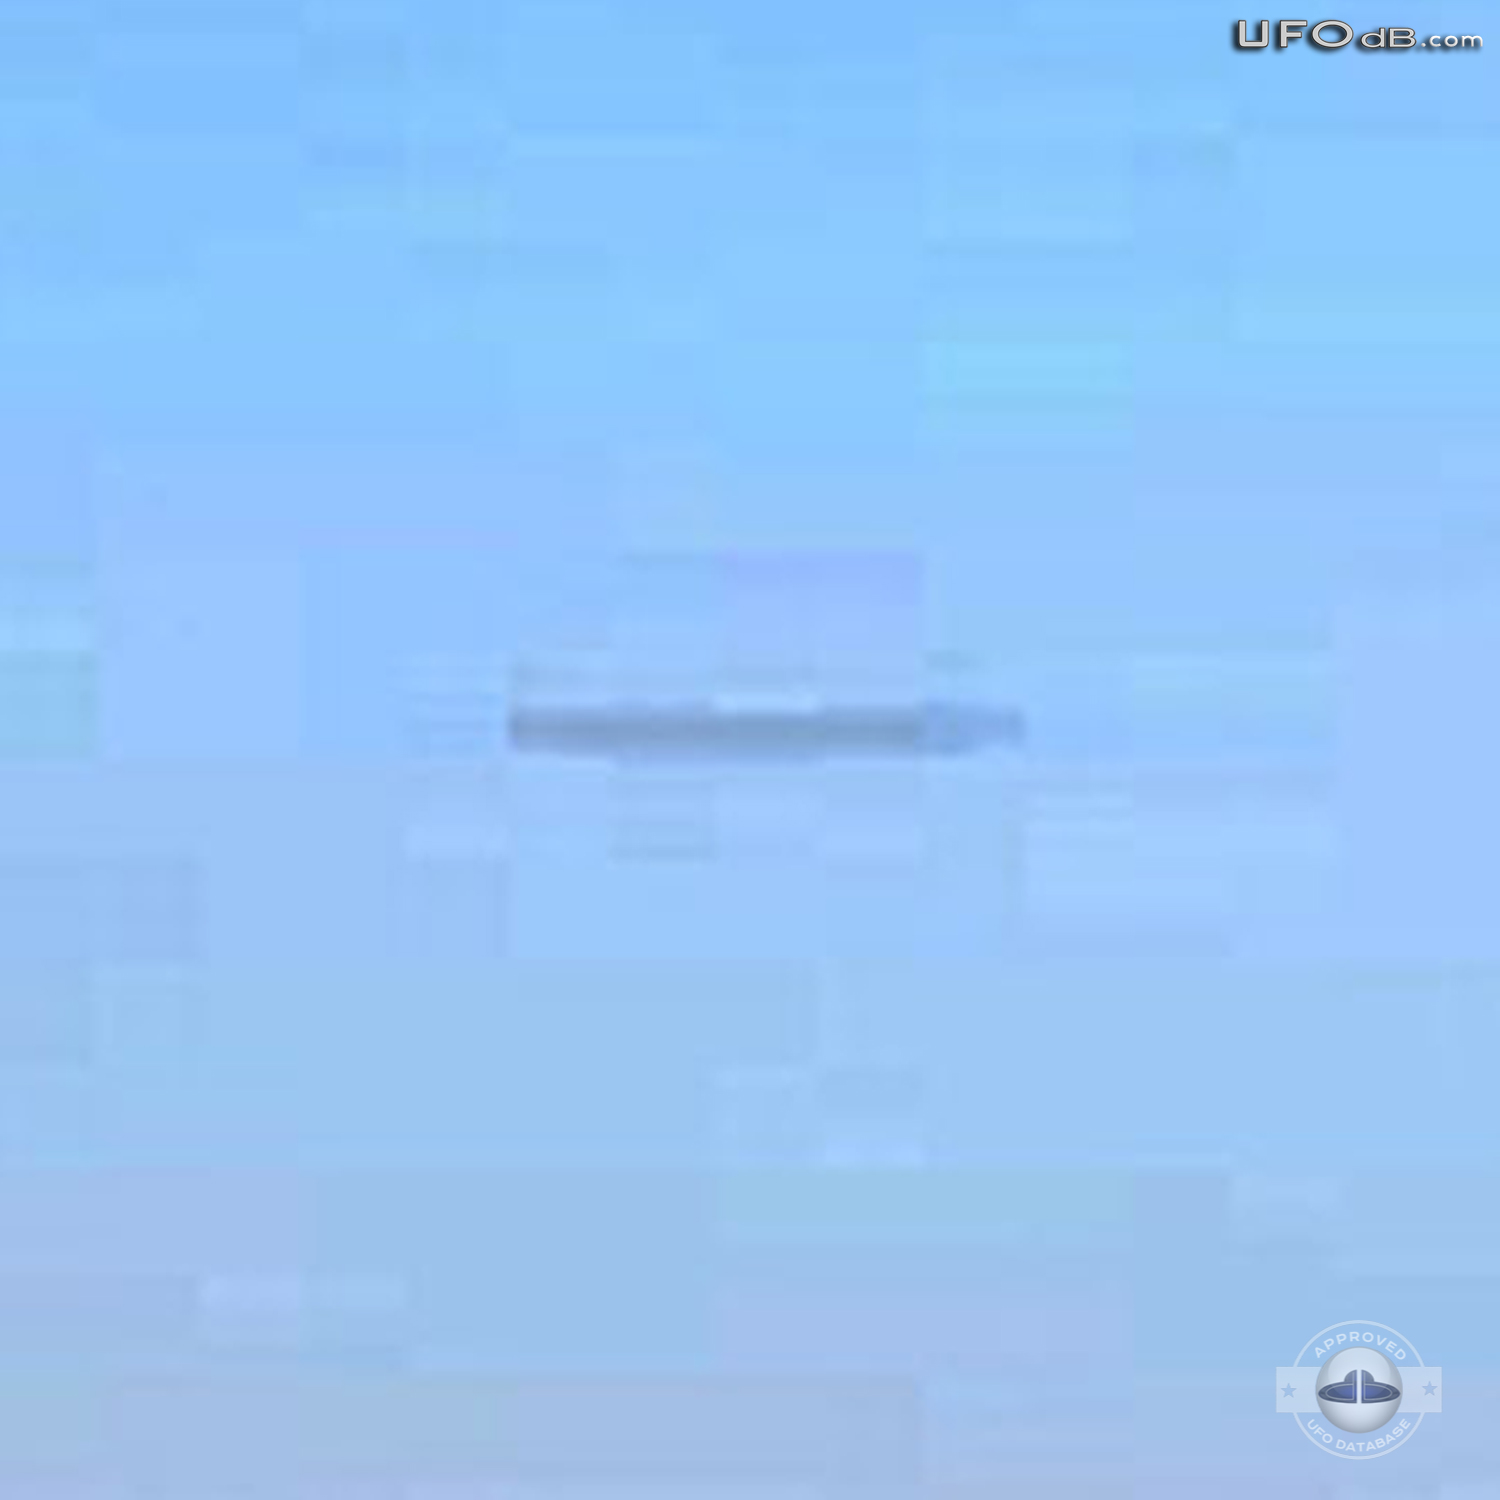 Yavapai Point Cam capture UFO picture | Grand Canyon USA | May 24 2011 UFO Picture #323-4